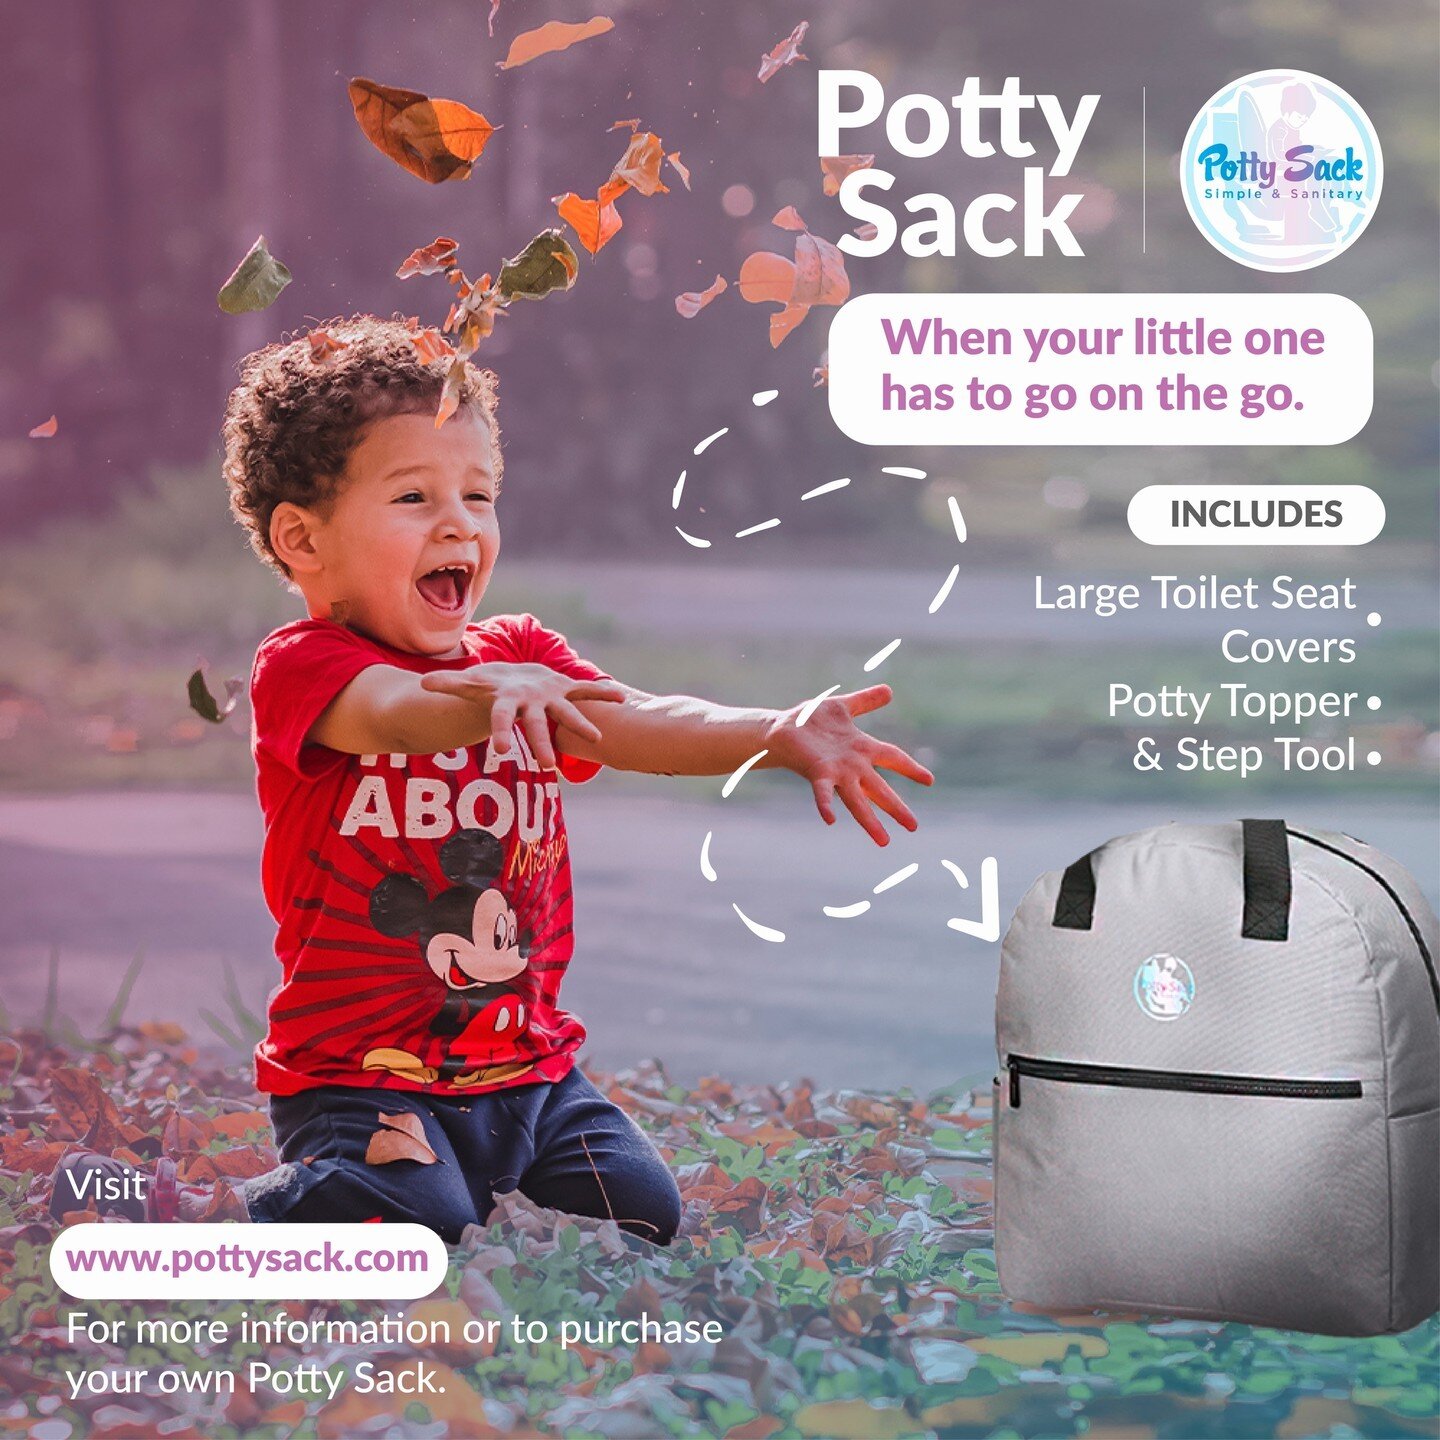 Click the Link below or visit www.pottysack.com to learn more about this new toddler parent accessory. 

#pottysack #pottyseat #toddler #potty training #toiletseatcover